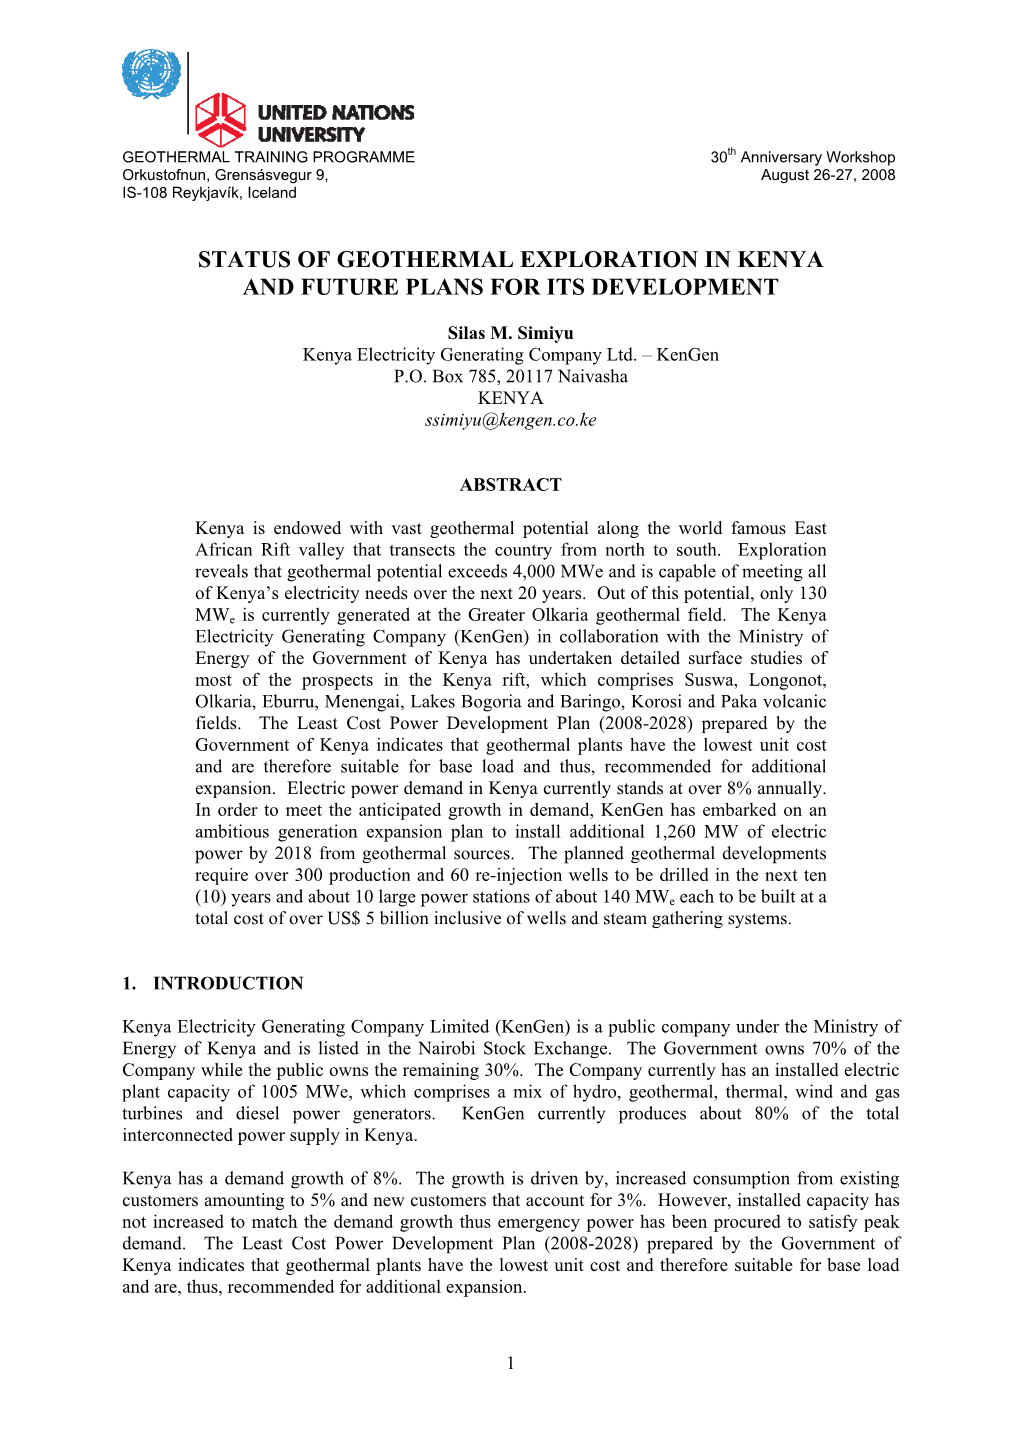 Status of Geothermal Exploration in Kenya and Future Plans for Its Development